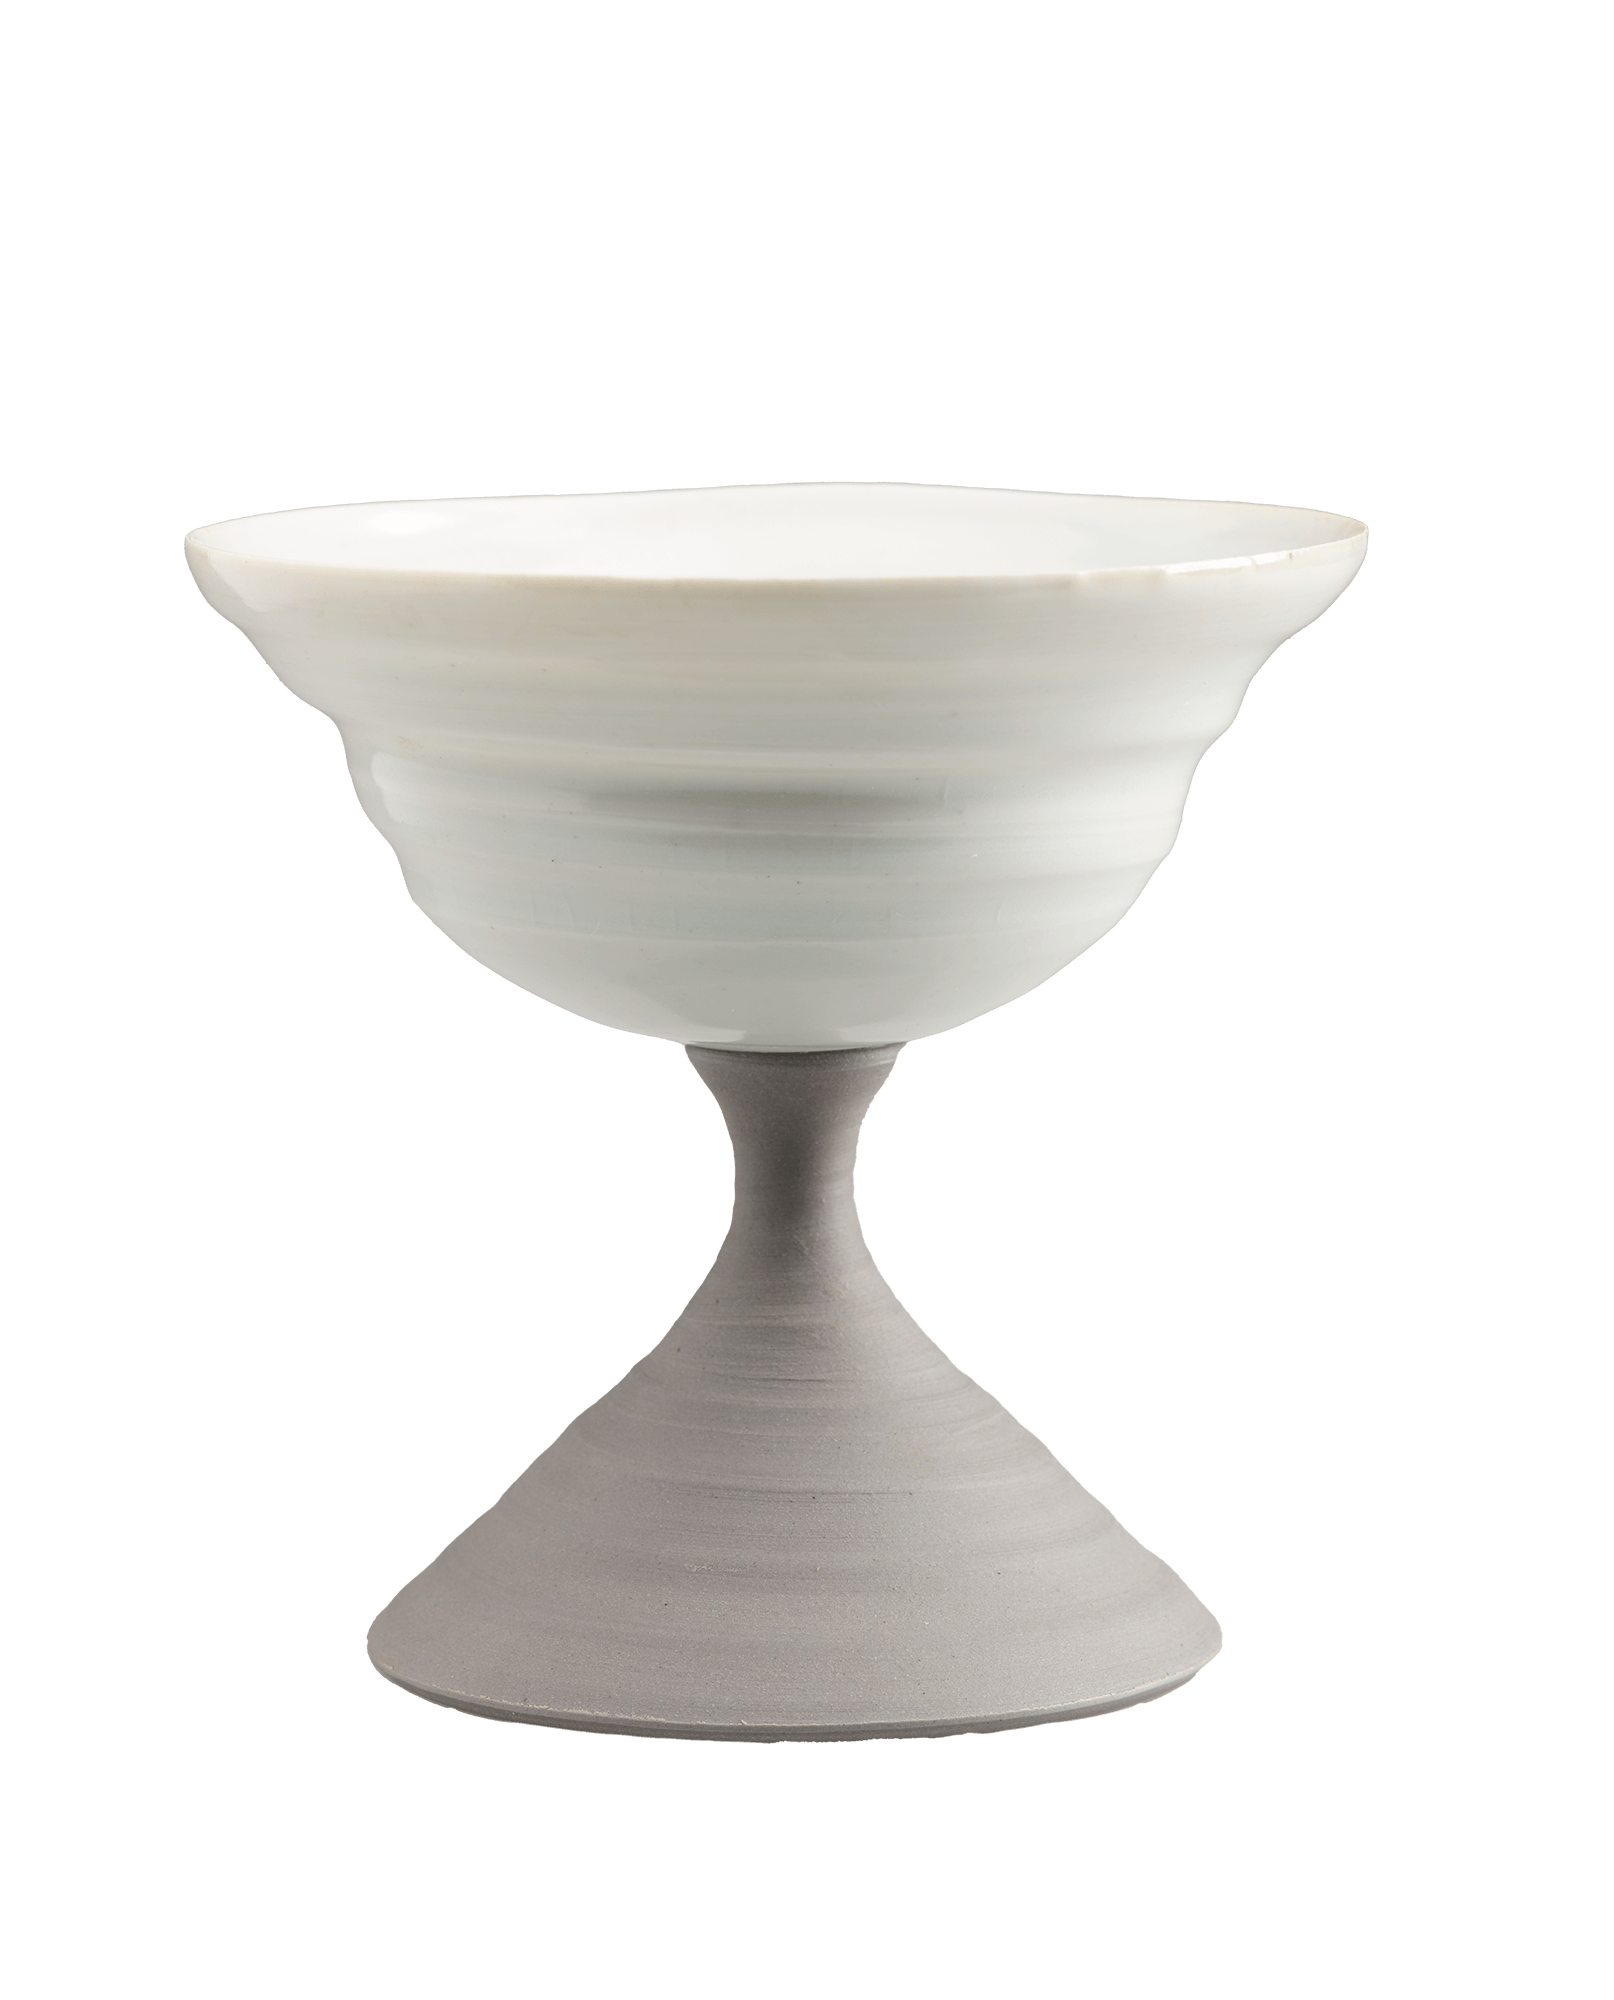 /A%20compote%20in%20an%20hourglass%20shape.%20A%20white%20bowl%20rests%20on%20top%20of%20a%20gray%20base.